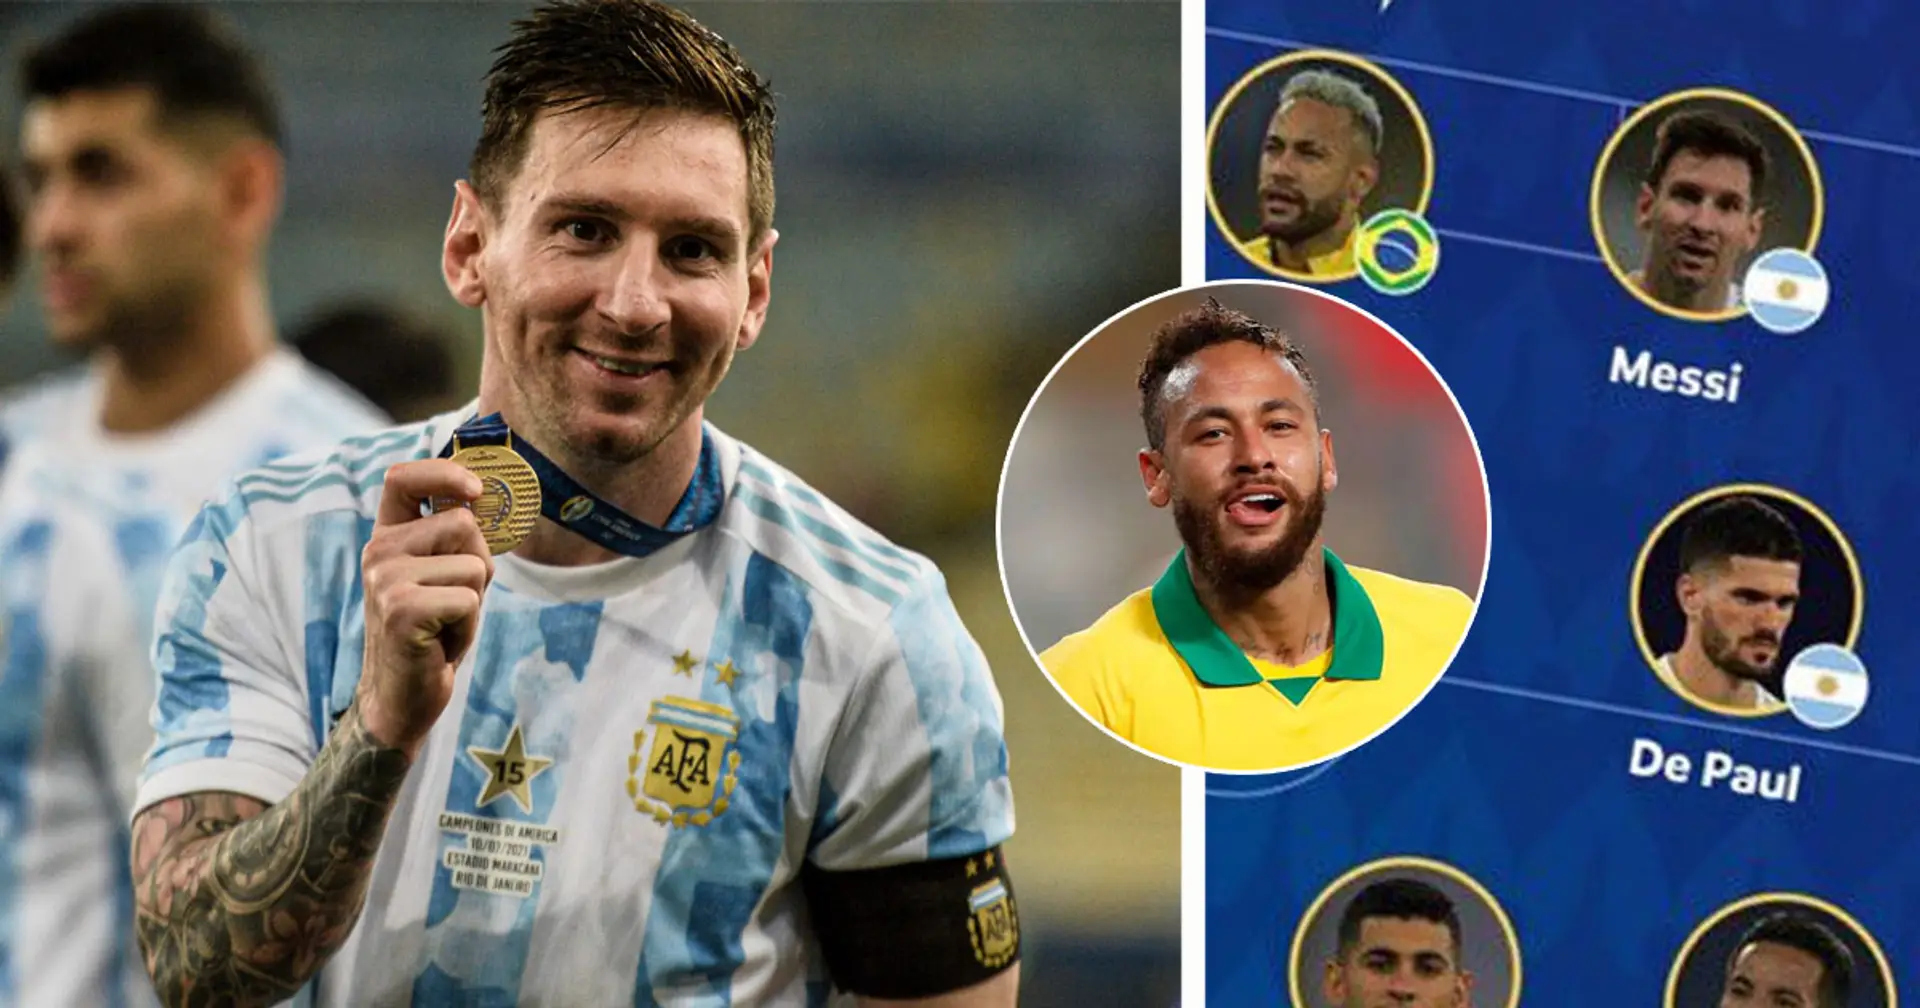 Messi included in Copa America team of the tournament